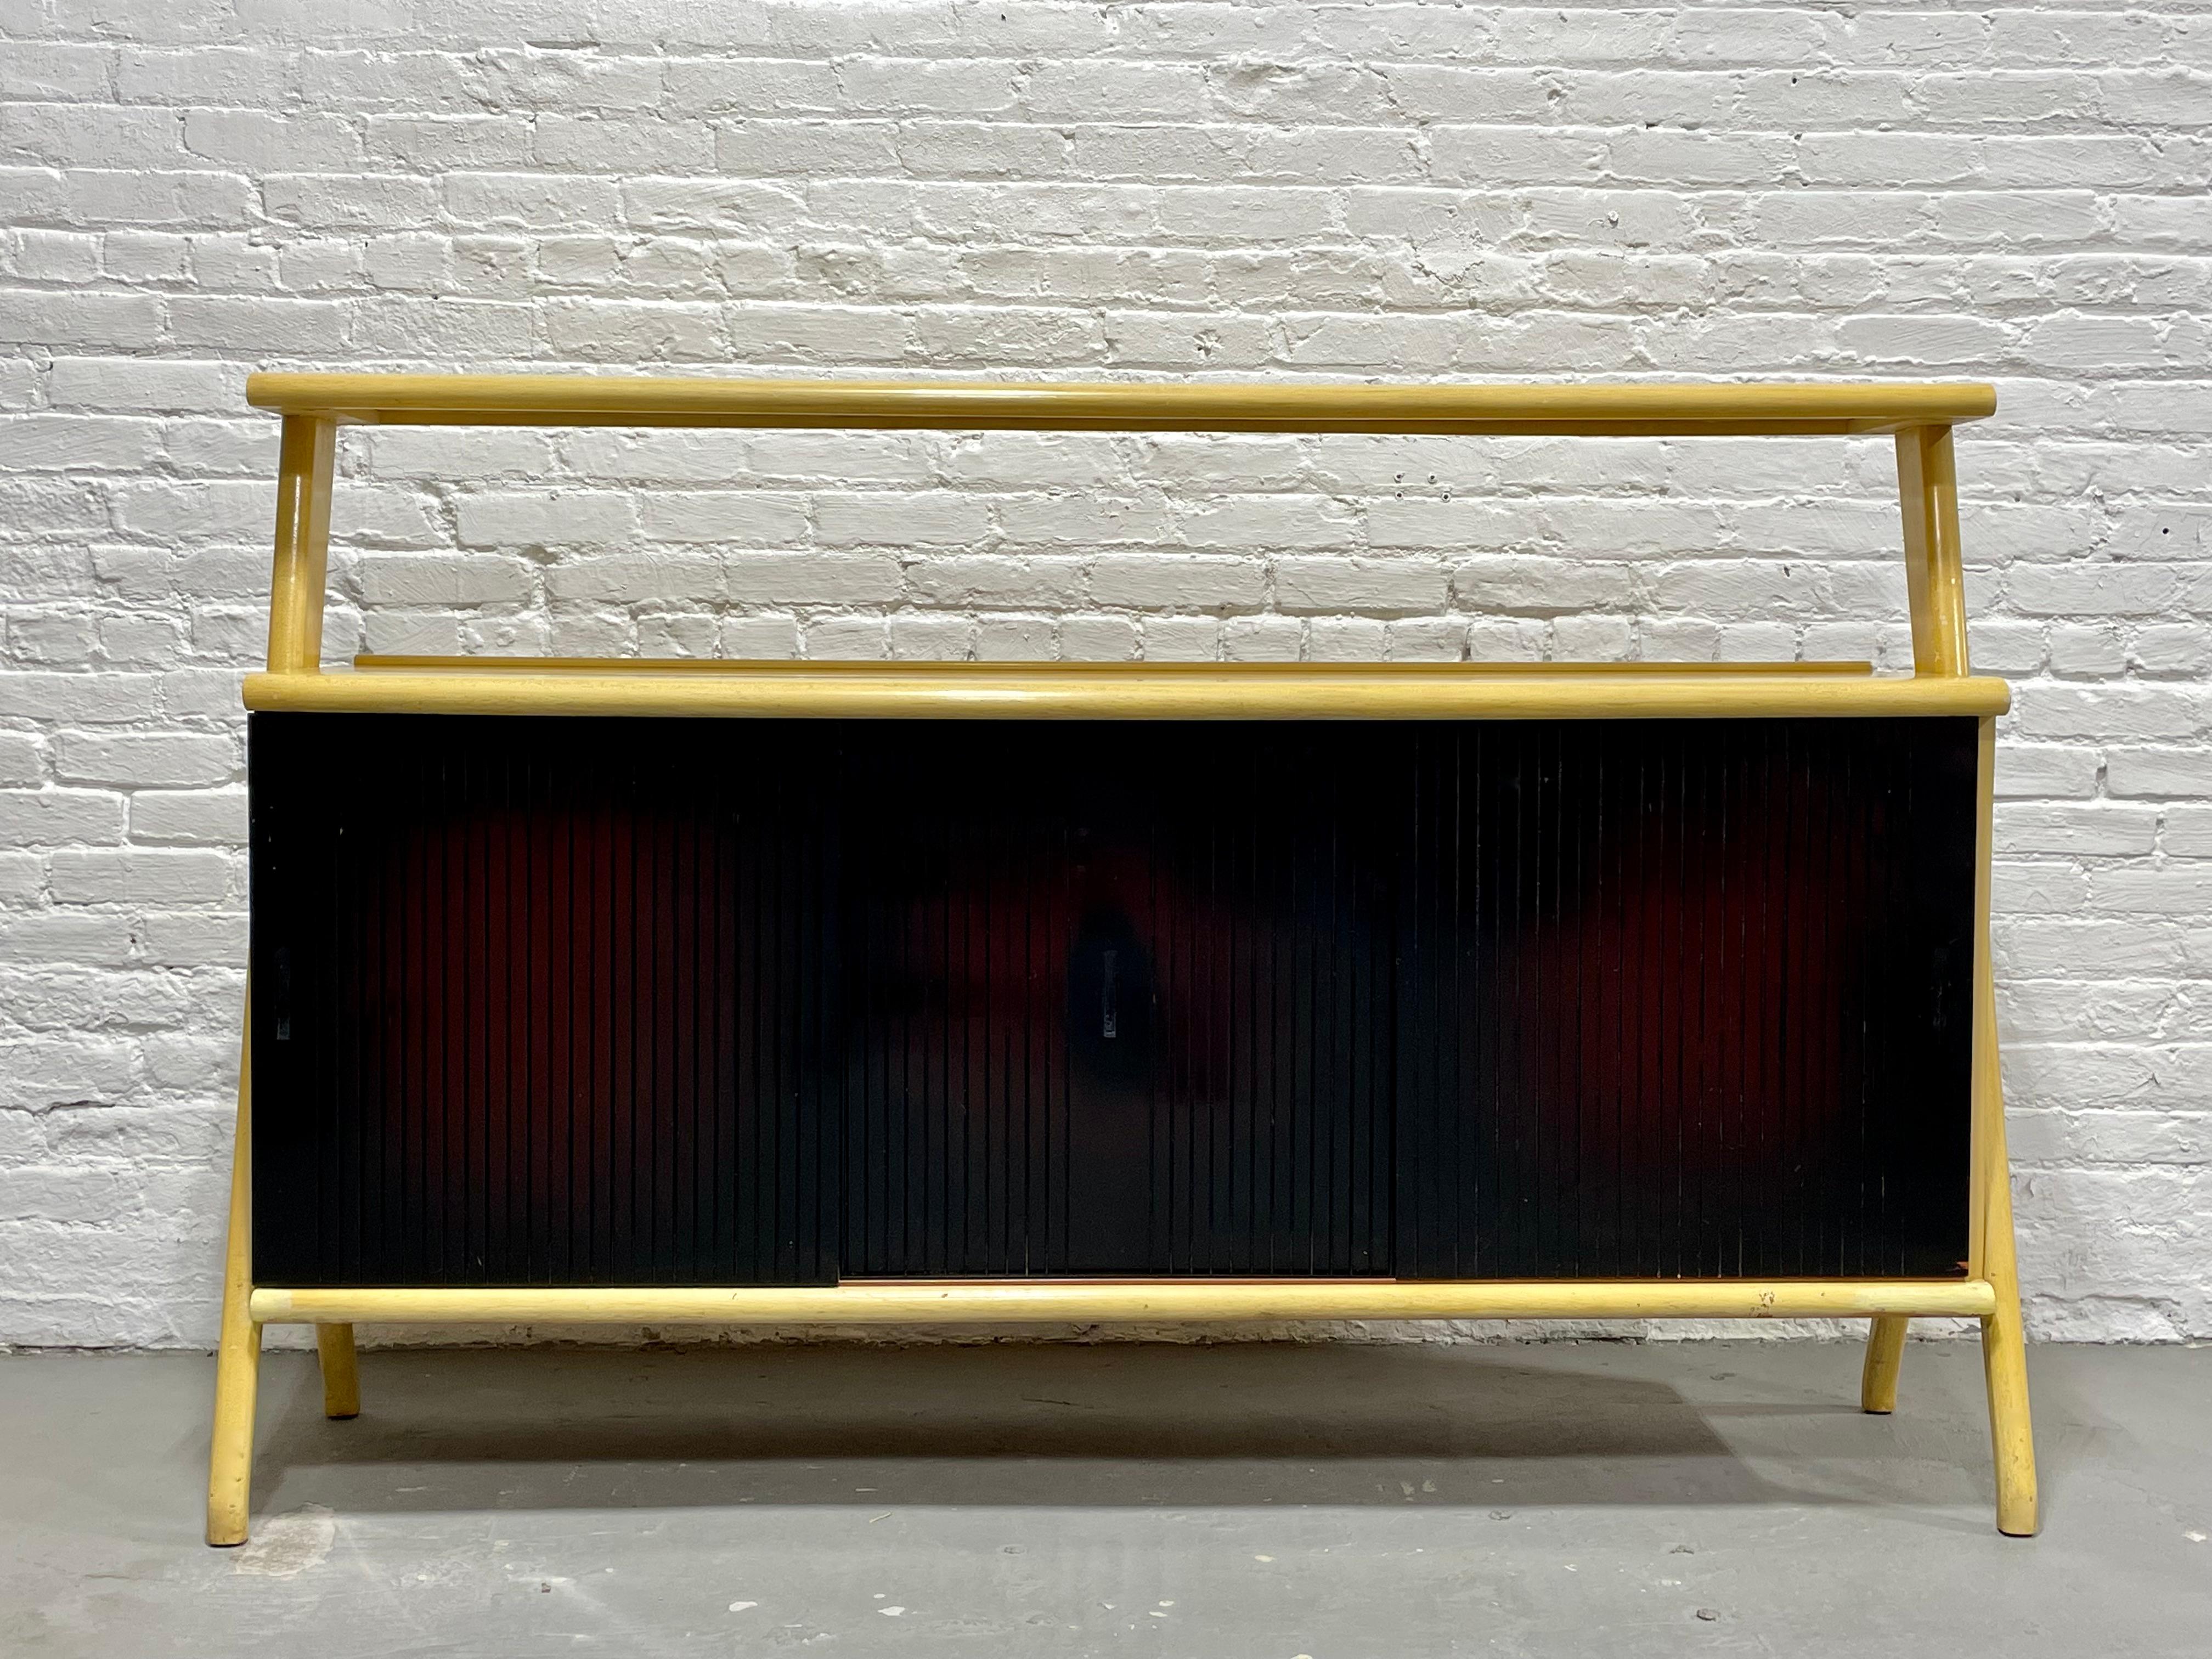 Mid-Century Modern sideboard in the style of Ico Parisi, circa 1960s. This monumental piece is gorgeous in its simple yet extremely functional design. The highlight of the piece is the unique forked leg design on either side. The piece is